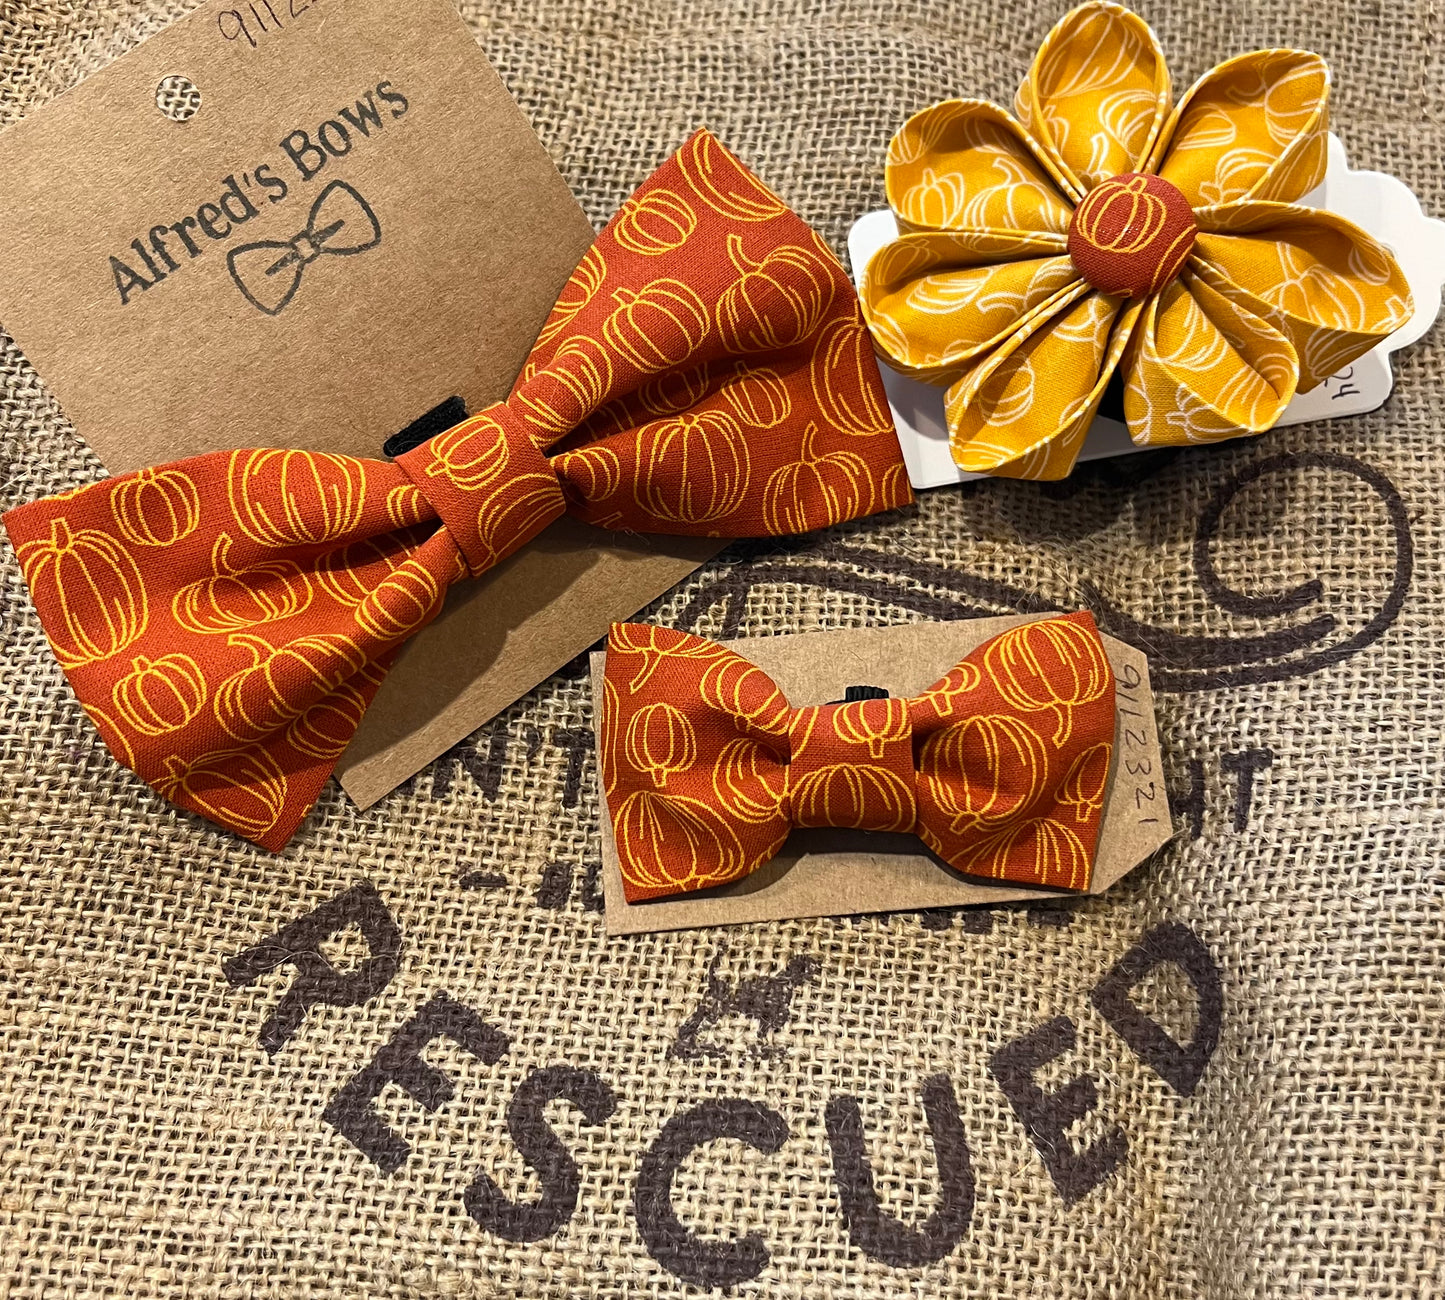 Alfred's Bows "Harvest Pumpkin" Tiny Bow